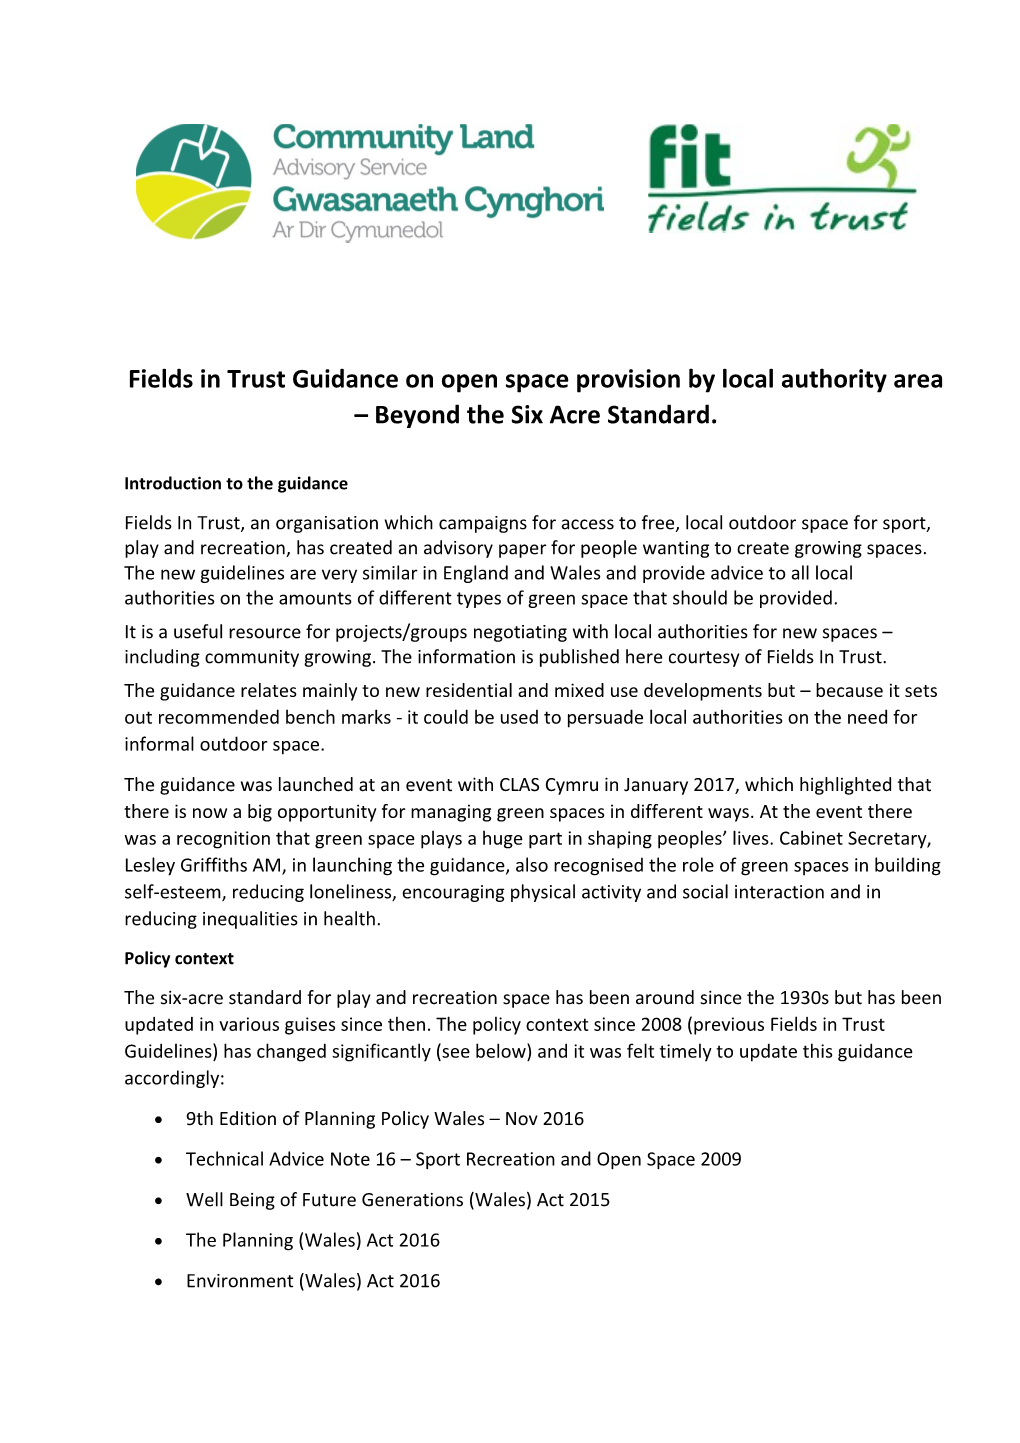 Fields in Trust Guidance on Open Space Provision by Local Authority Area Beyond the Six